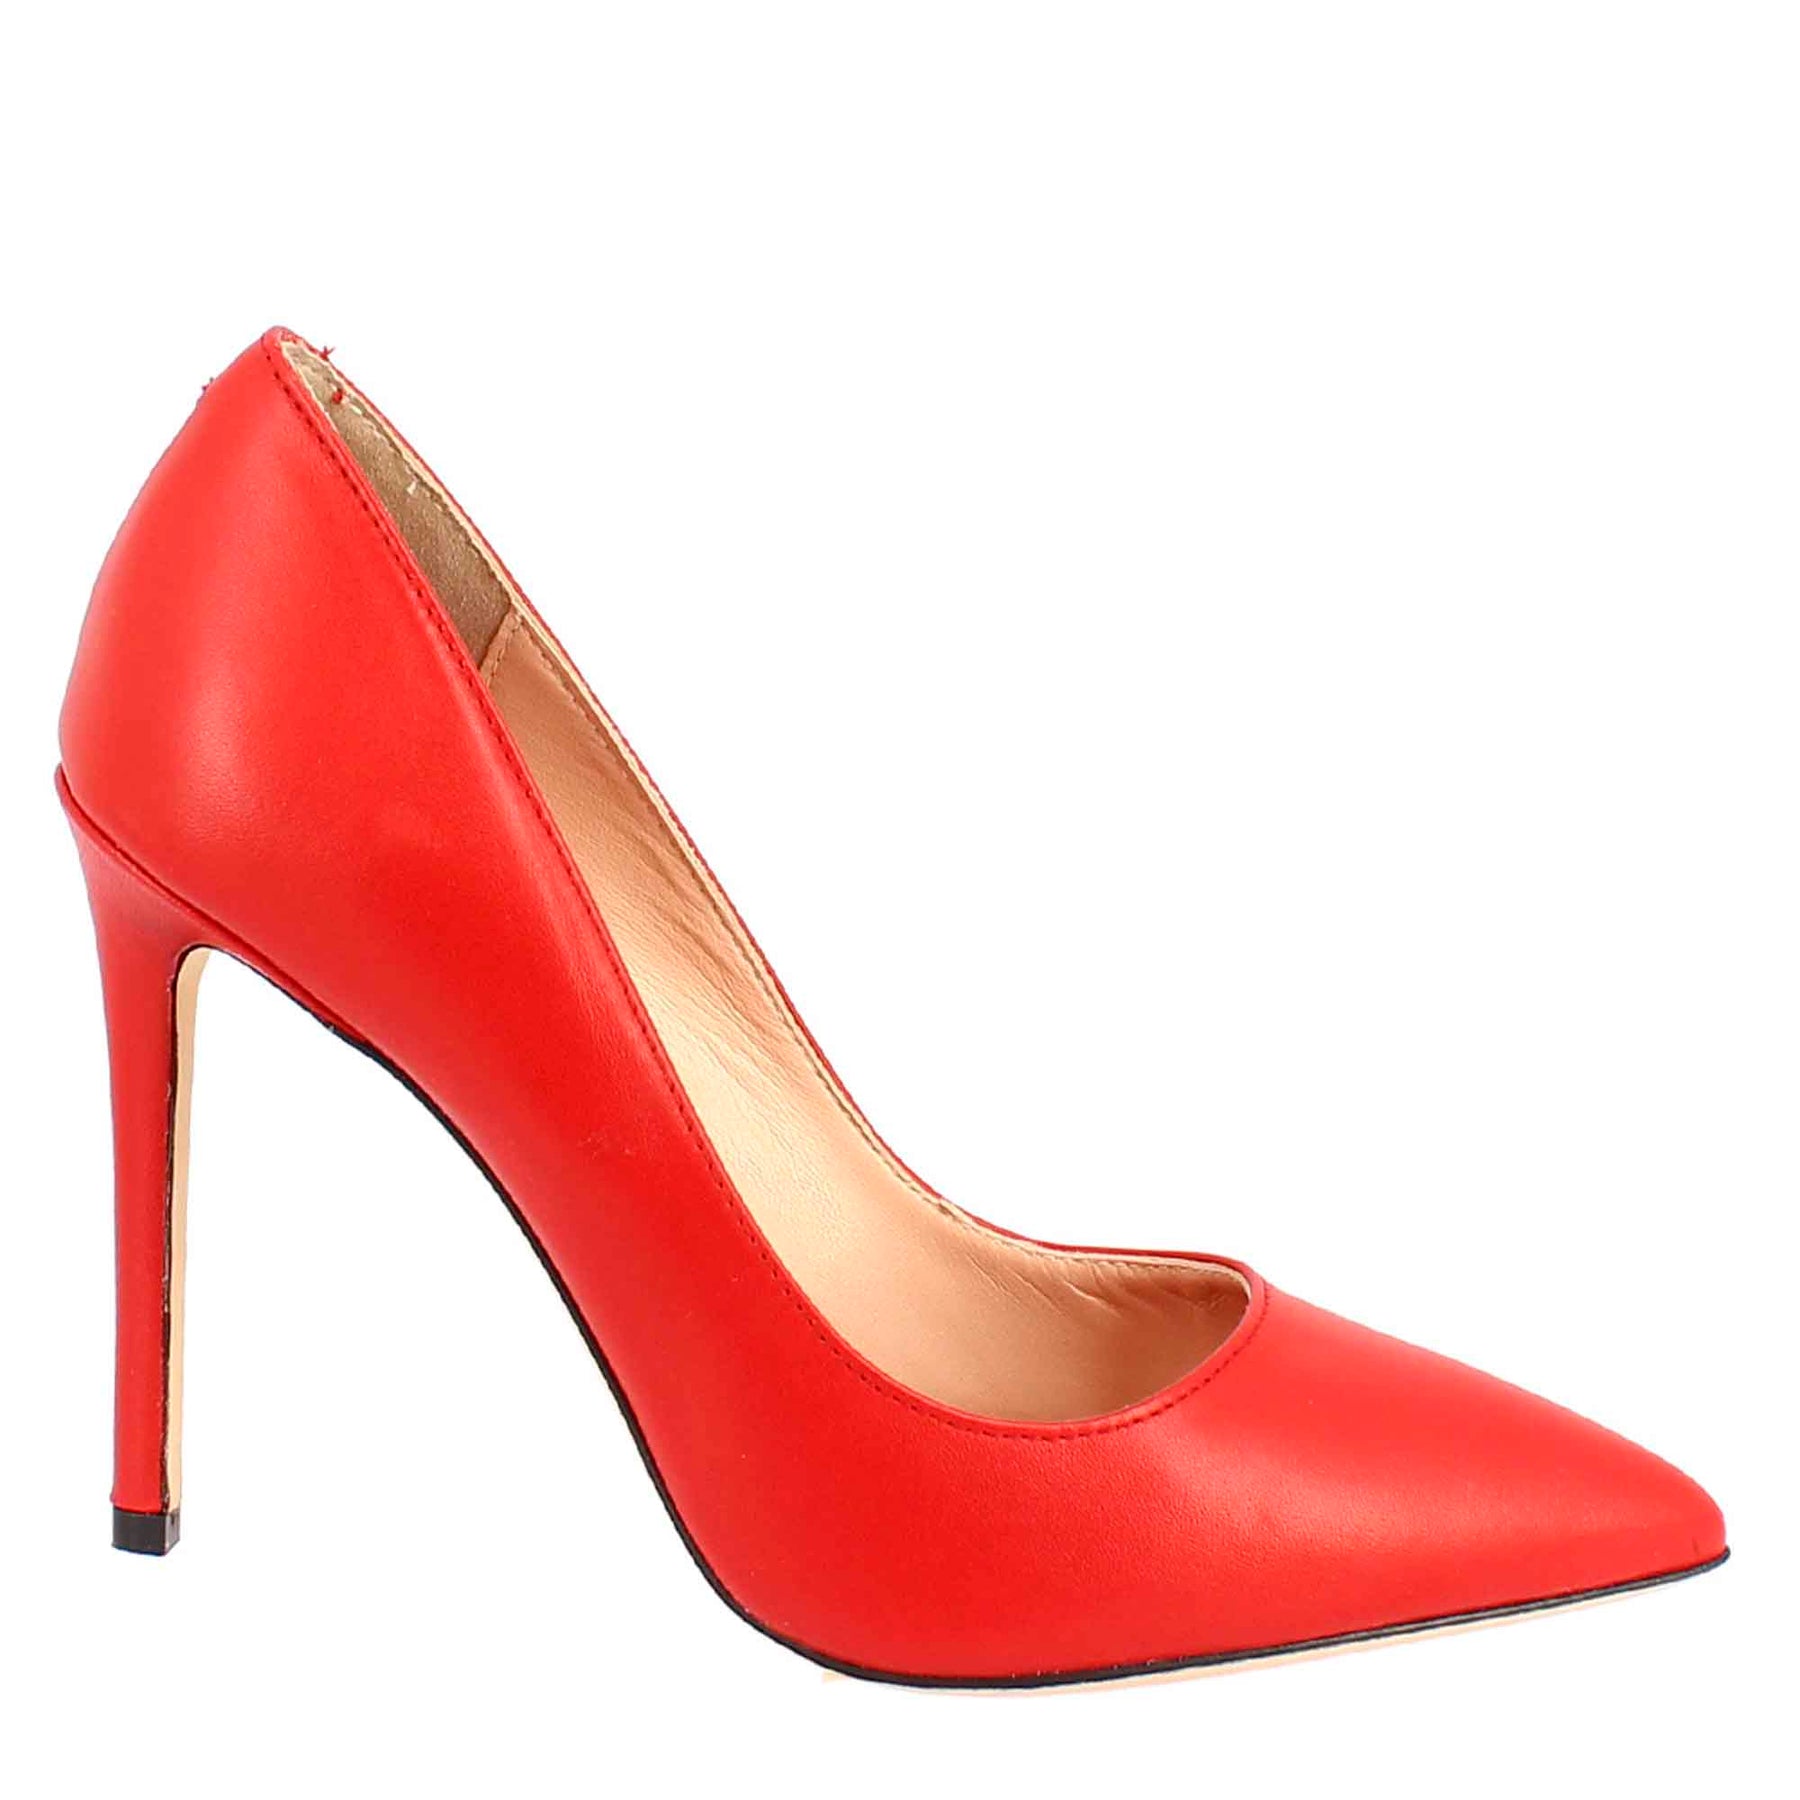 Buy Pumps Heels for Women Online in India at Regal Shoes